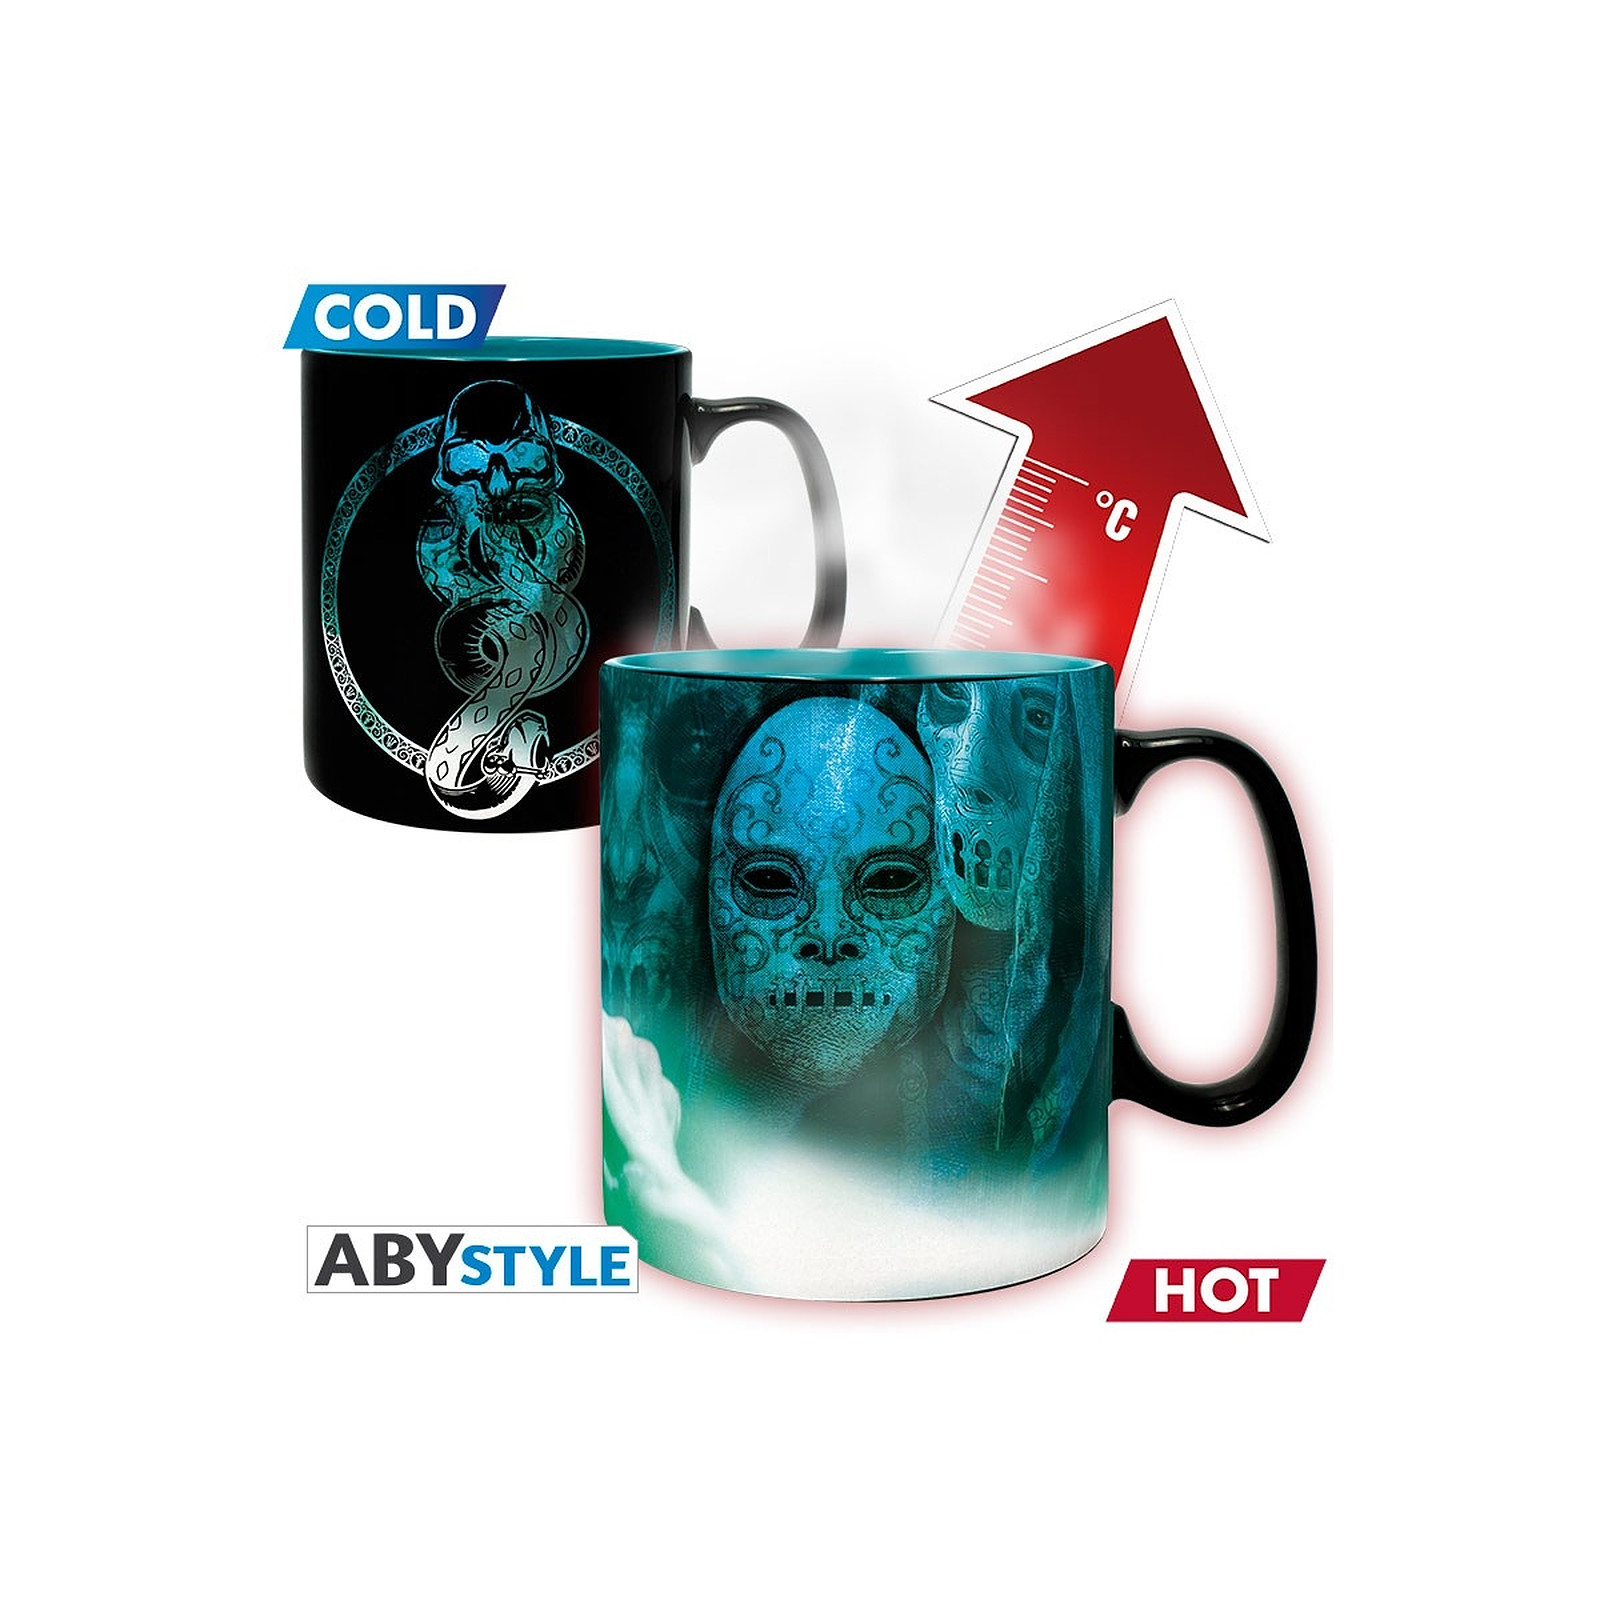 Harry Potter - Mug Thermo-reactif Voldemort - Mugs Abystyle